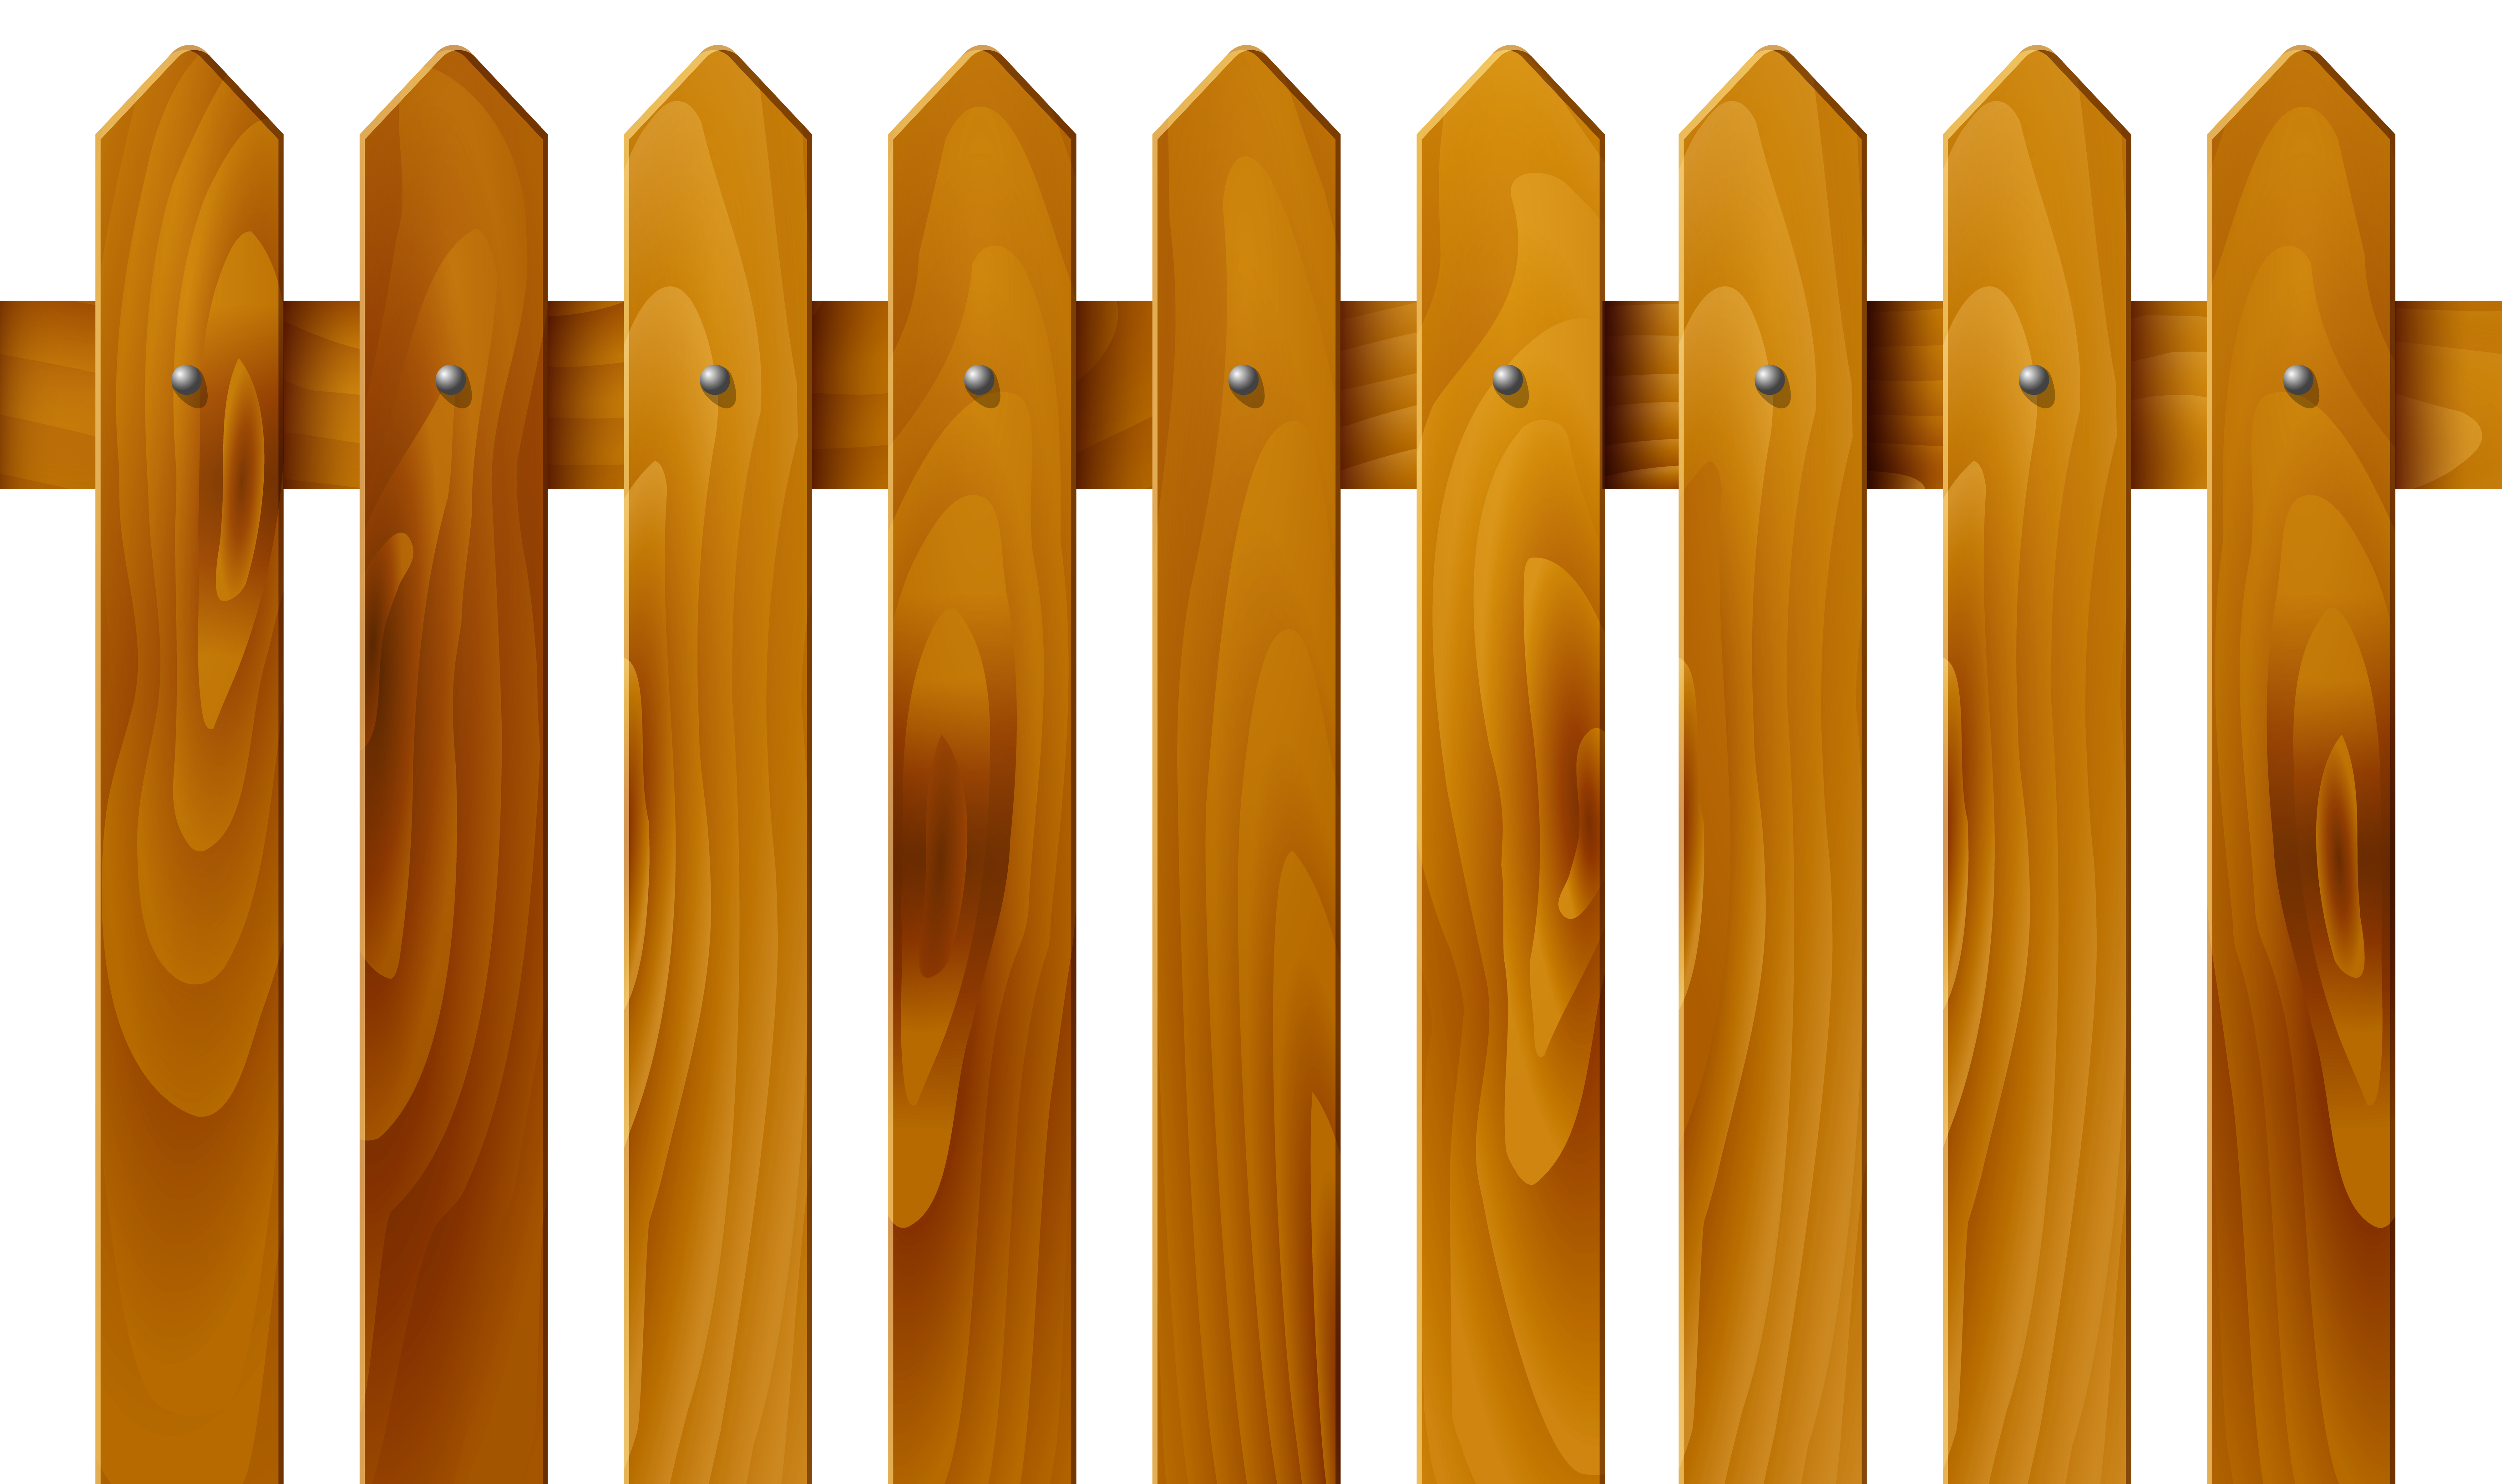 Wood fence cliparthut free. Fencing clipart stance